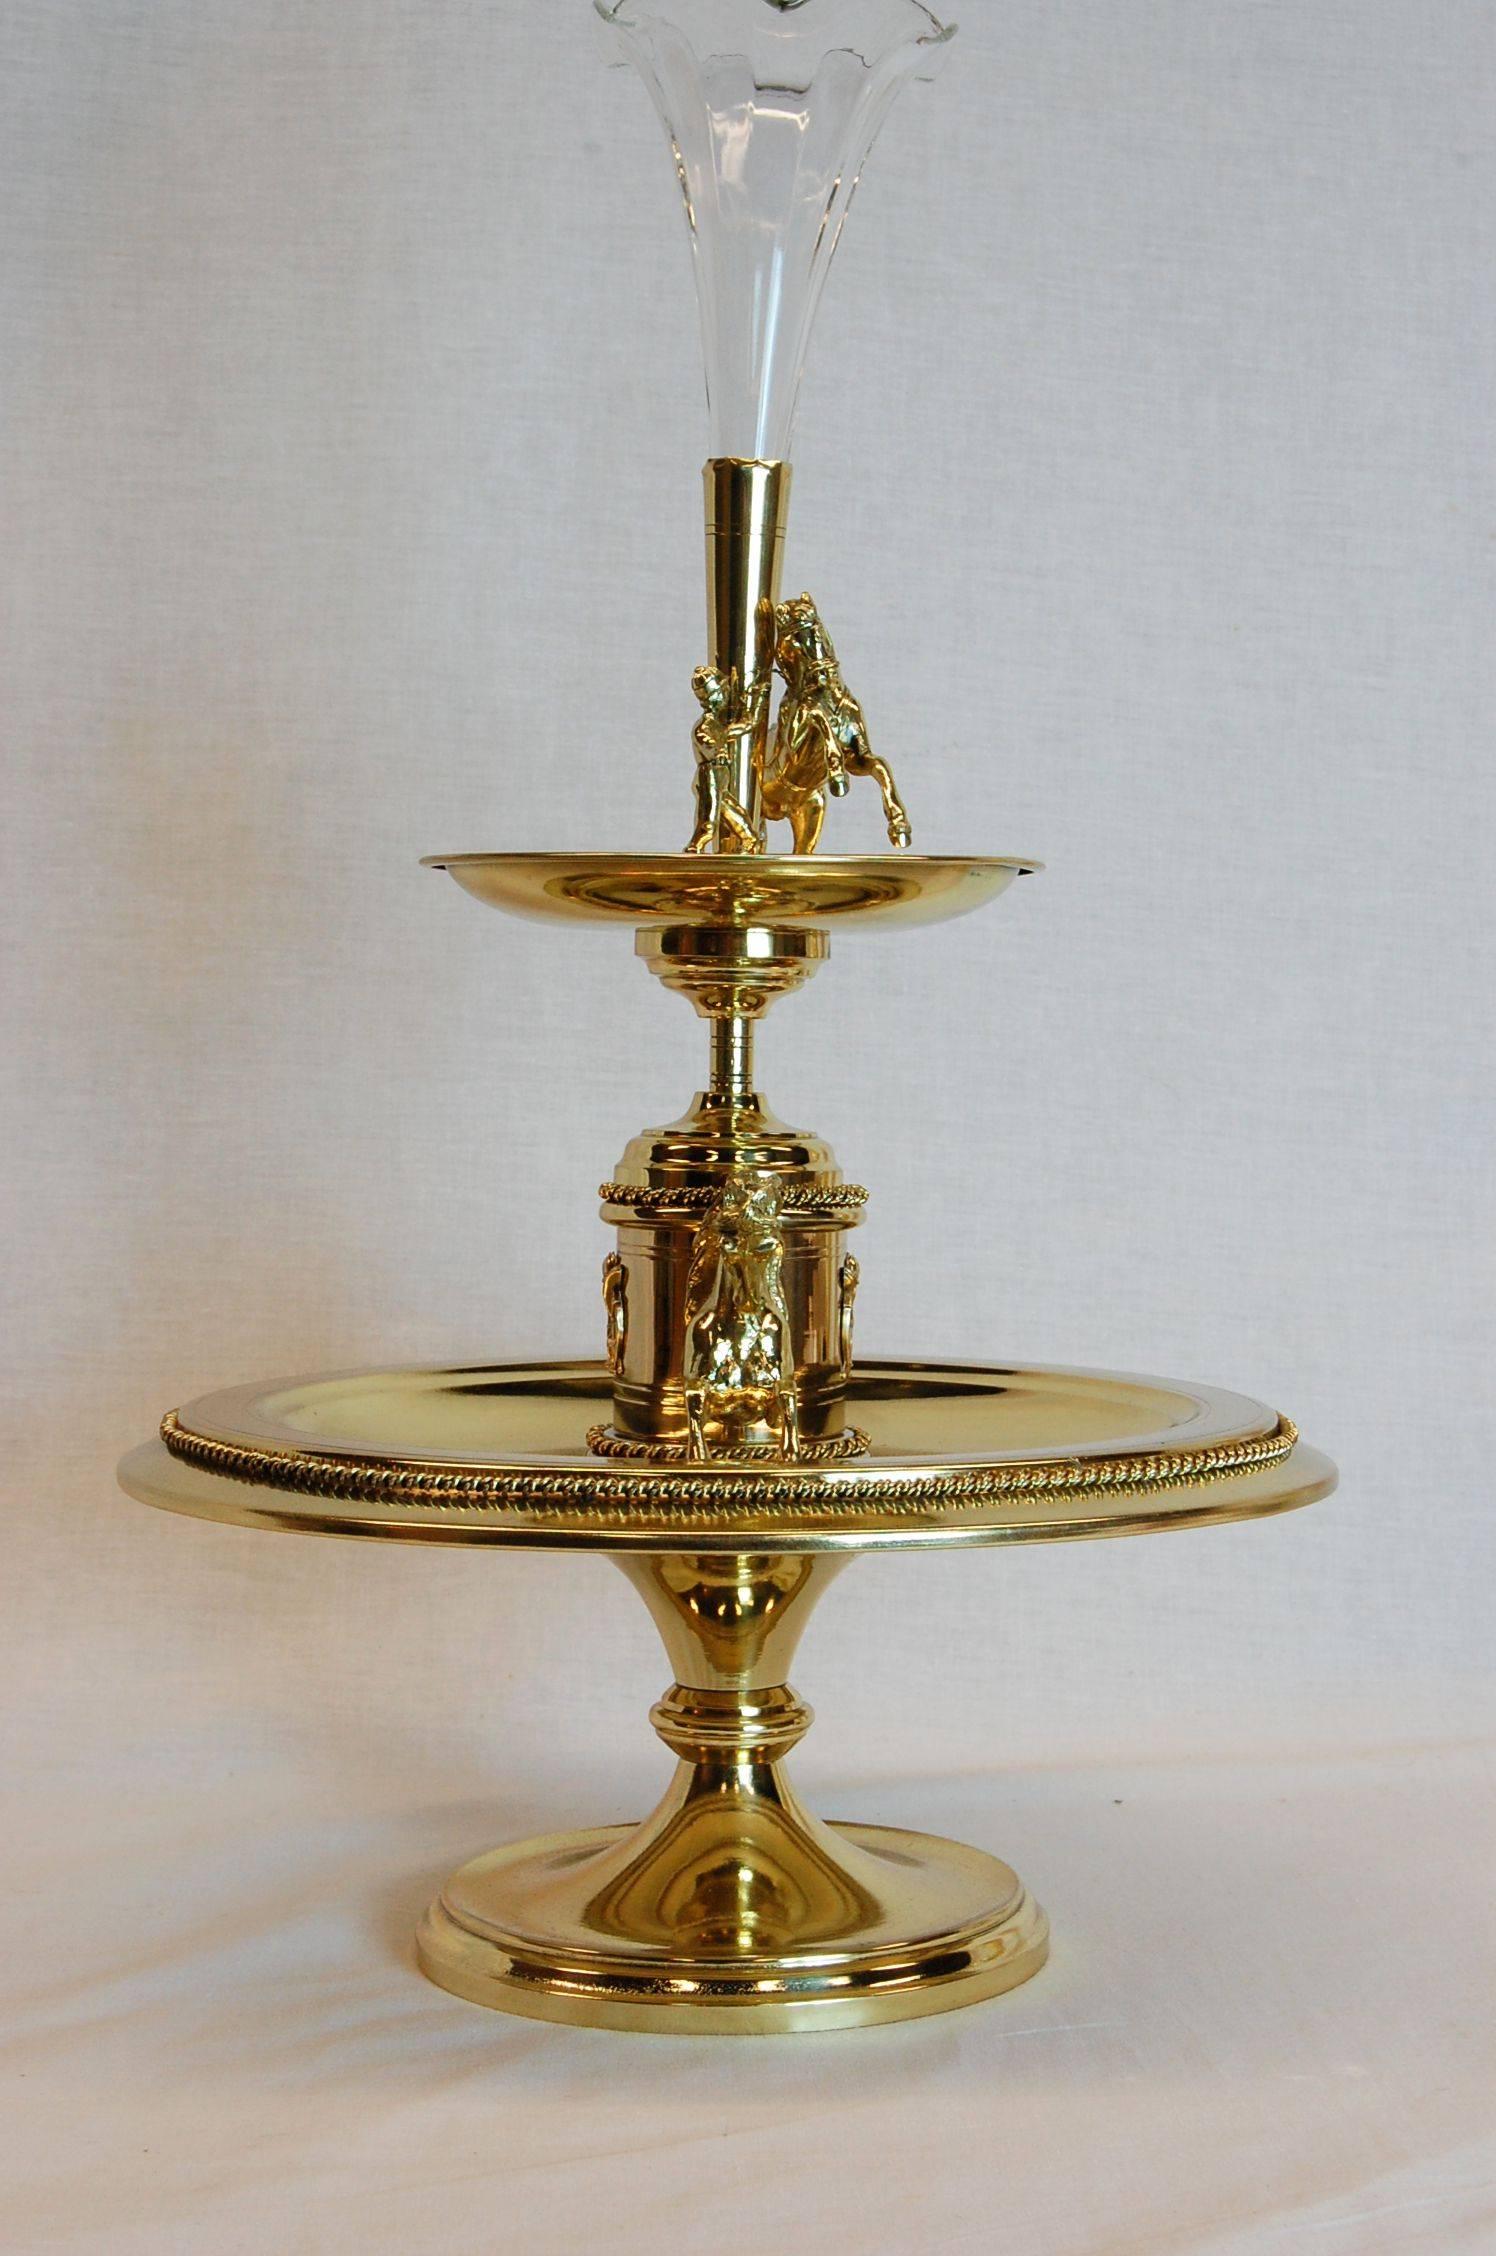 Cast 19th Century Brass Horse Racing Motif Centrepiece with Fluted Glass Epergne